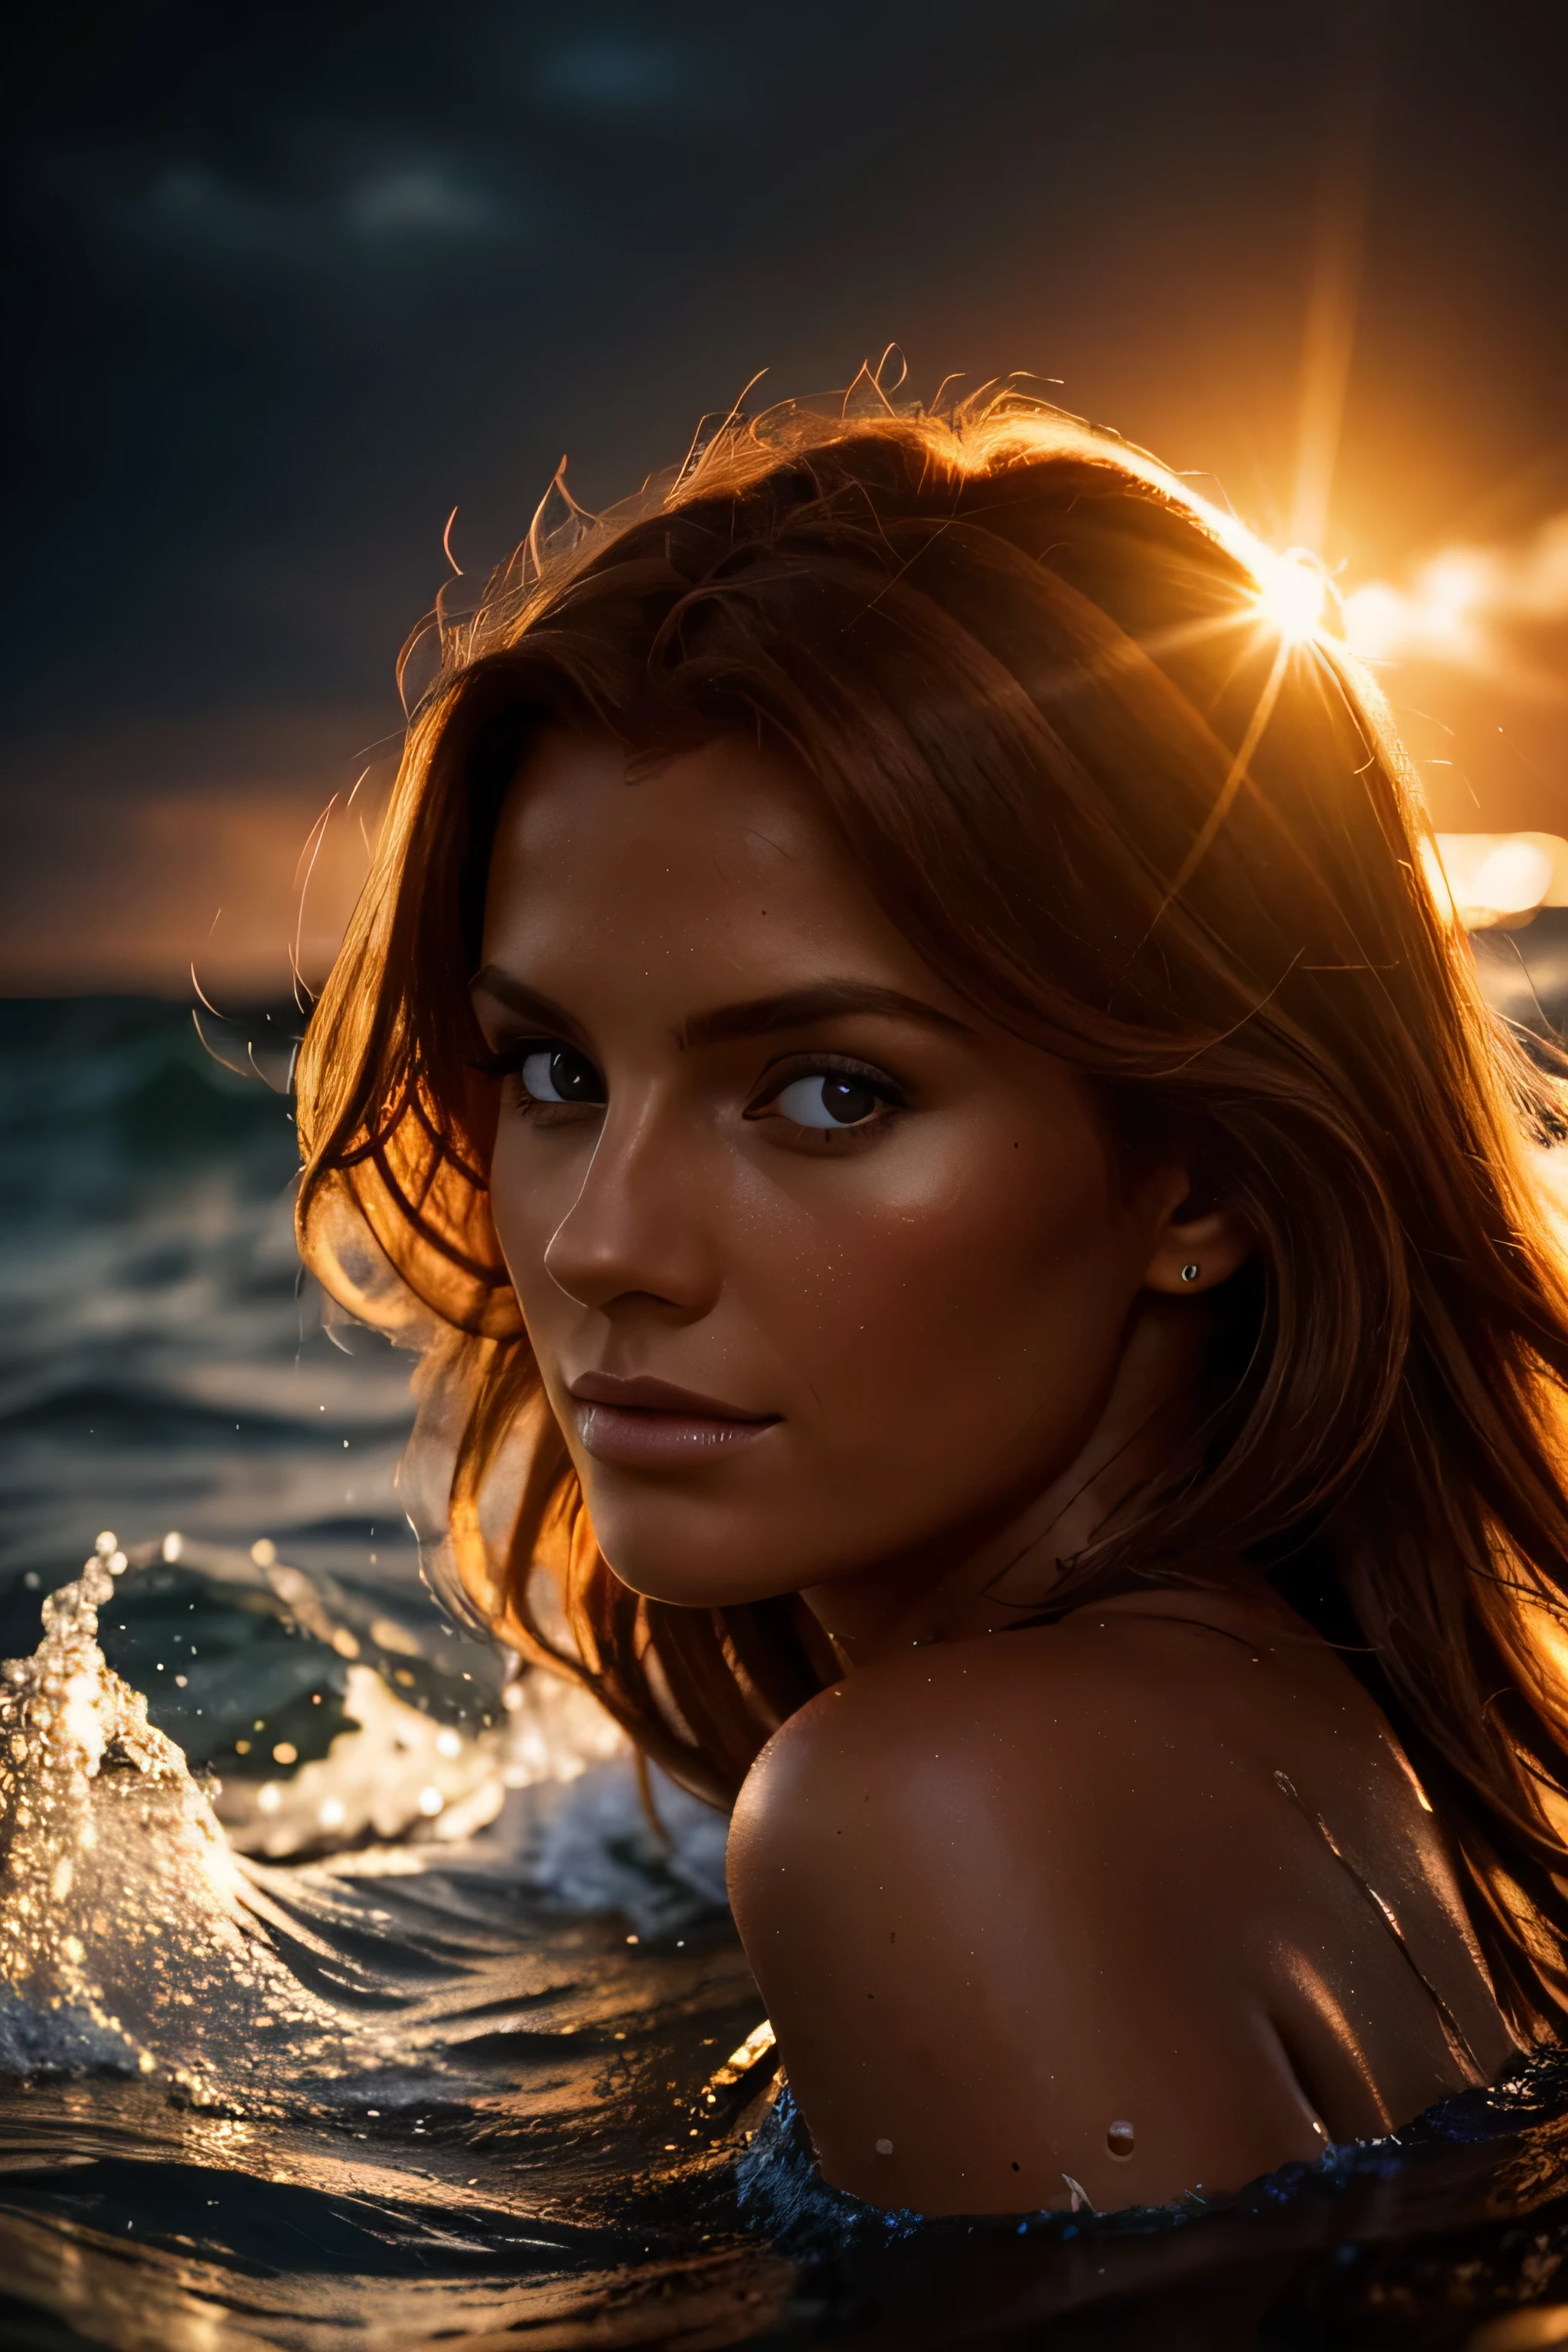 Highly 詳細 photograph of a dark tanned orange-haired European woman trapped in a wave of water. プロのカラーモデル撮影写真(highly 詳細:1.1), ハッセルブラッド, ダークフィルムノワール照明, 詳細, 8K, (神の光線:0.8), (レンズフレア:0.8), フィルムグレイン, ボケ, 被写界深度.